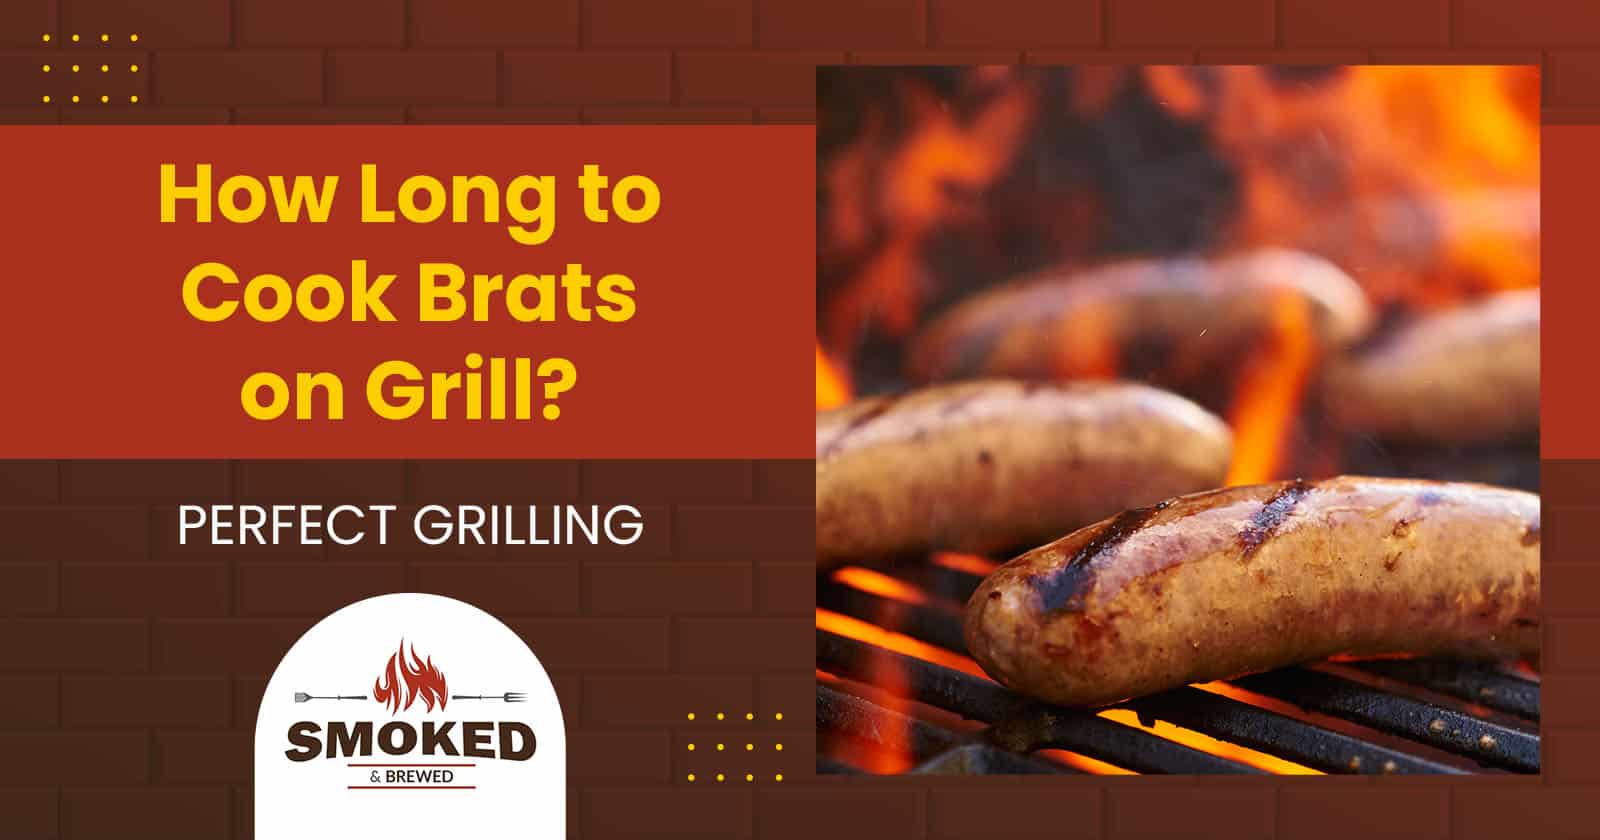 How Long to Cook Brats on Grill? [PERFECT GRILLING]